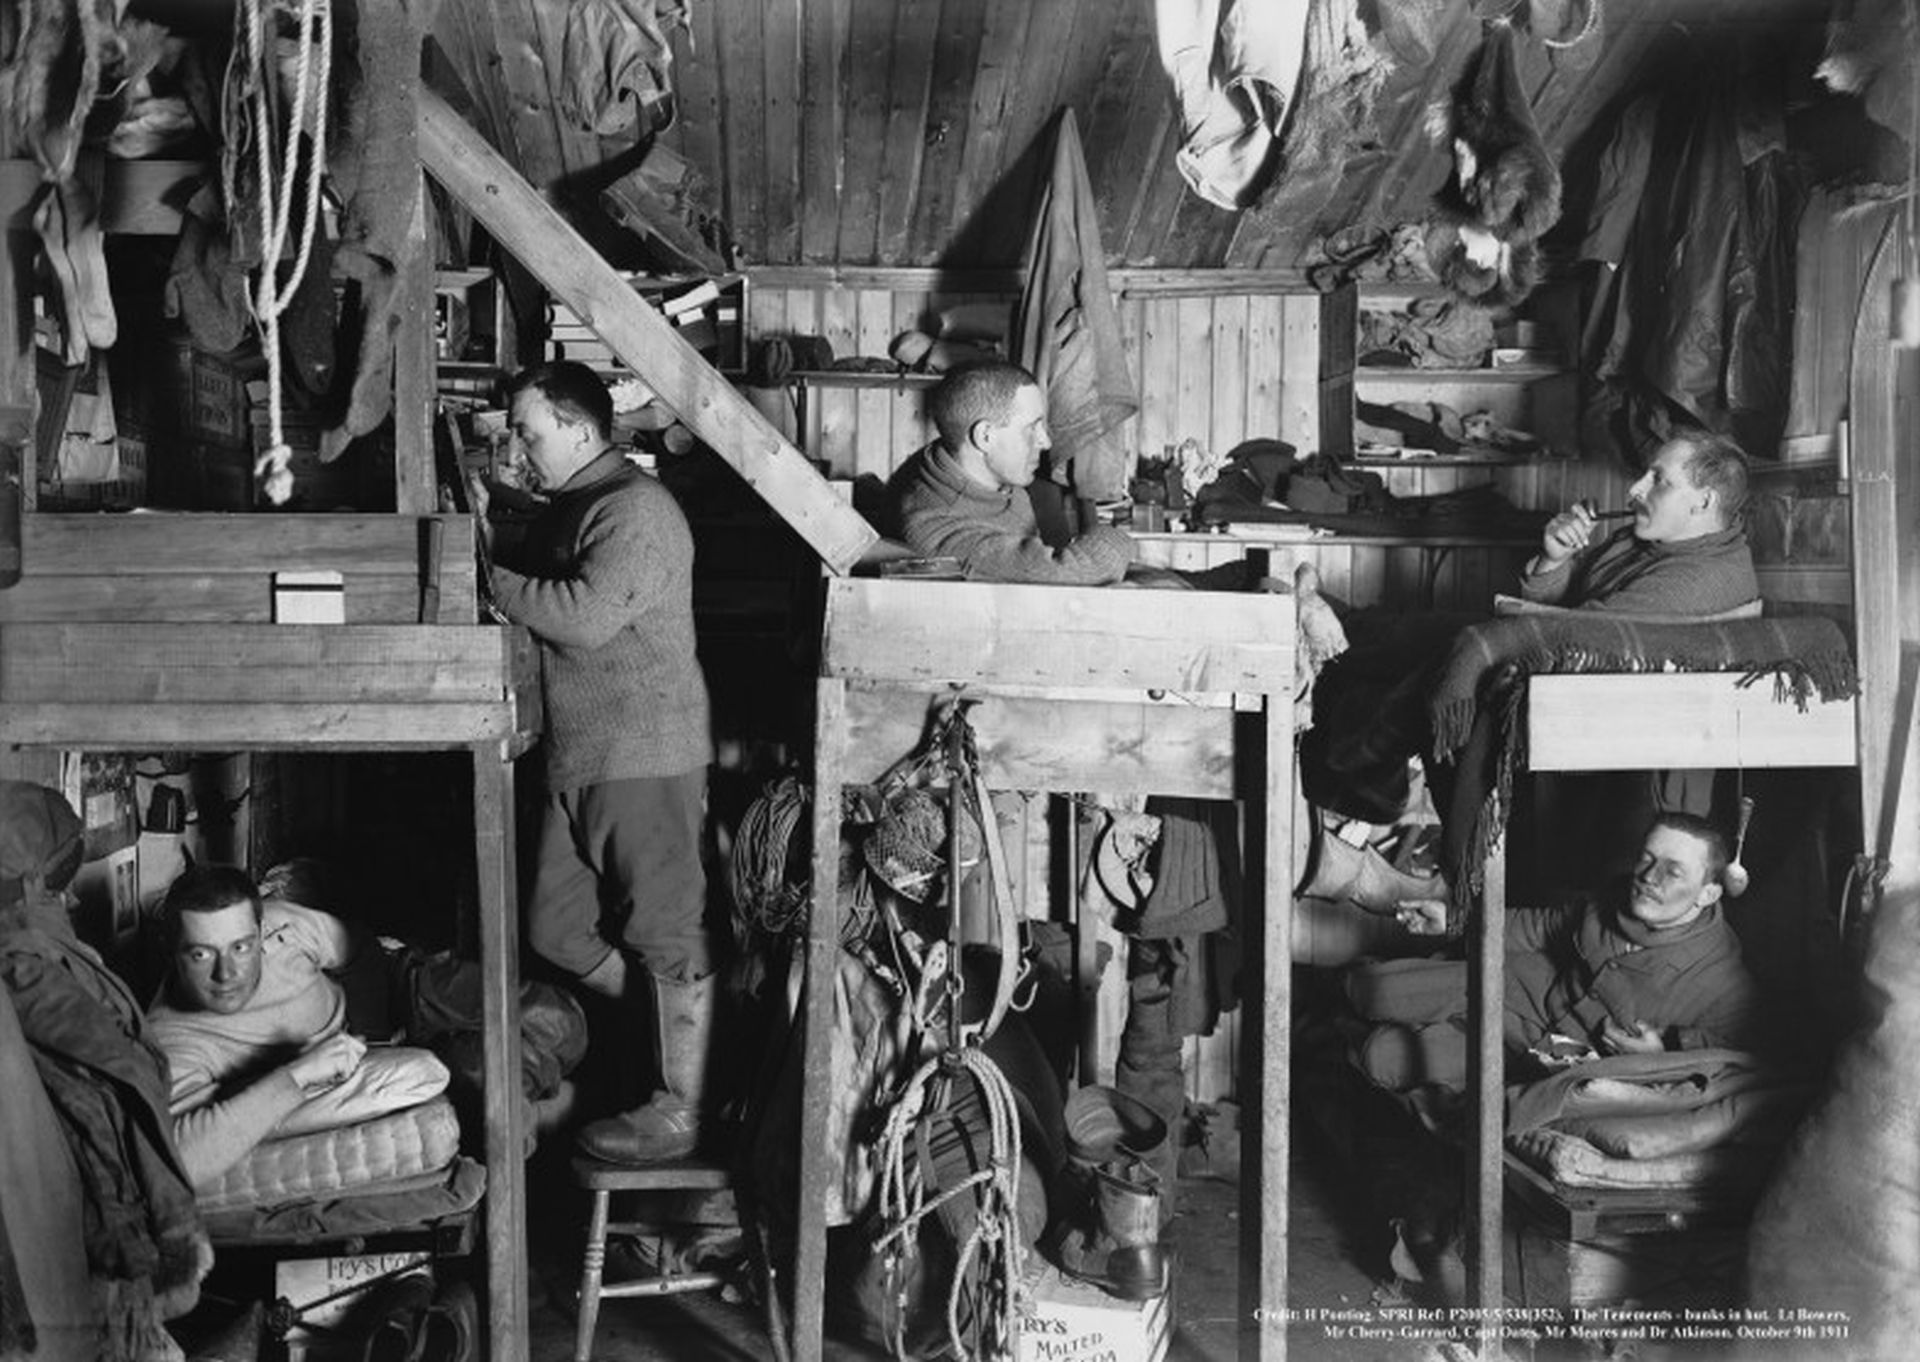 In the interior of the hut, Cherry-Garrard, Oates, Meares and Atkinson lie on bunks, Bowers stands on a chair next to his.